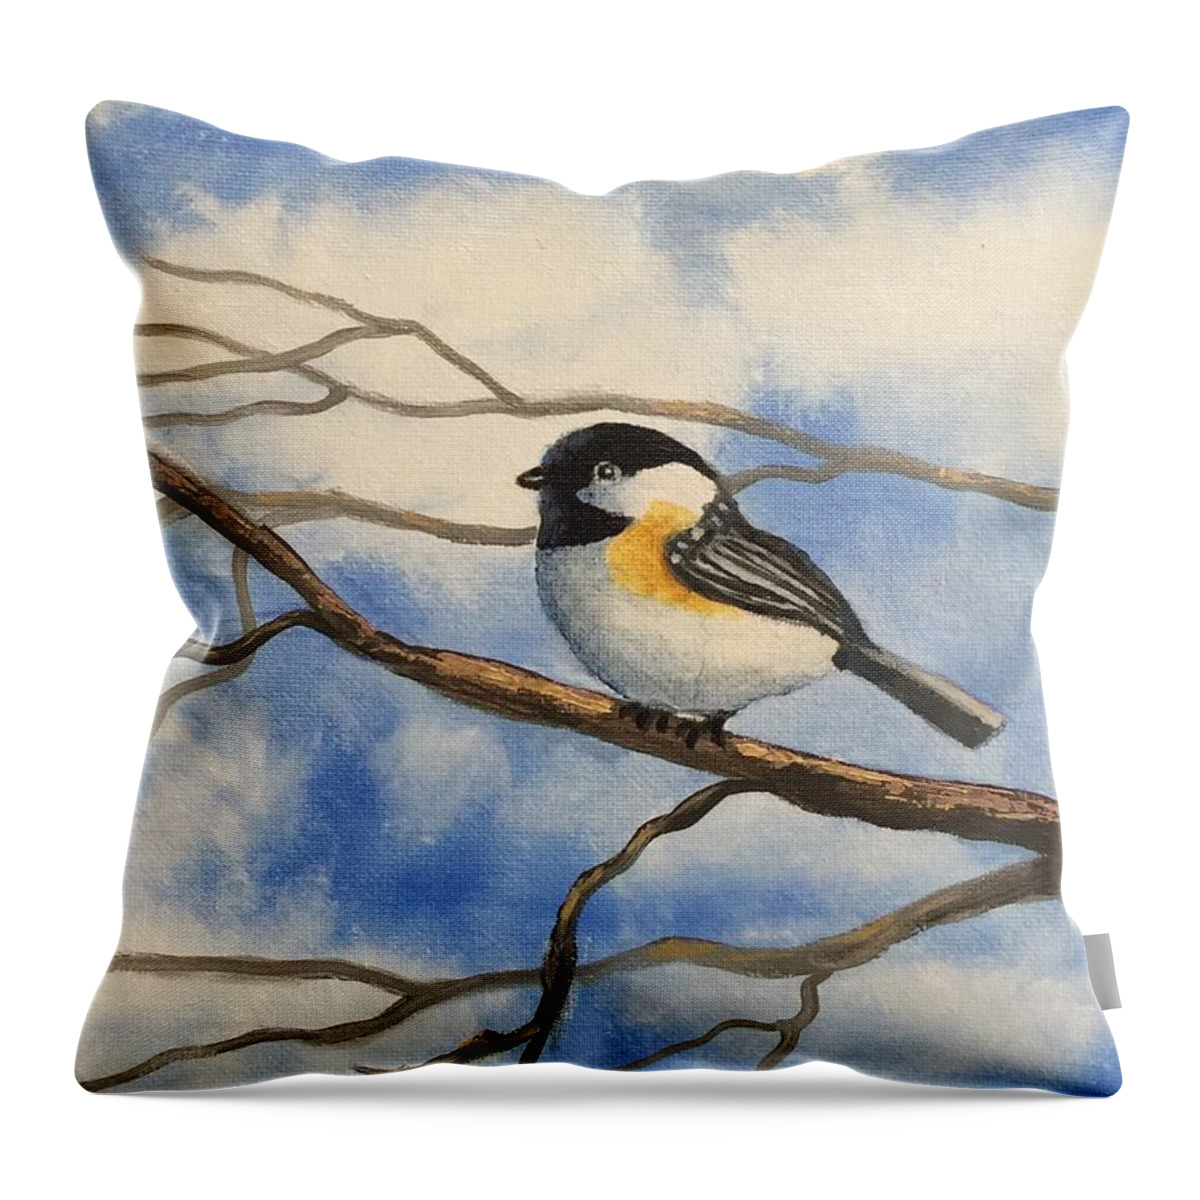 Chickadee Throw Pillow featuring the painting Chickadee on Branch by Brenda Bonfield